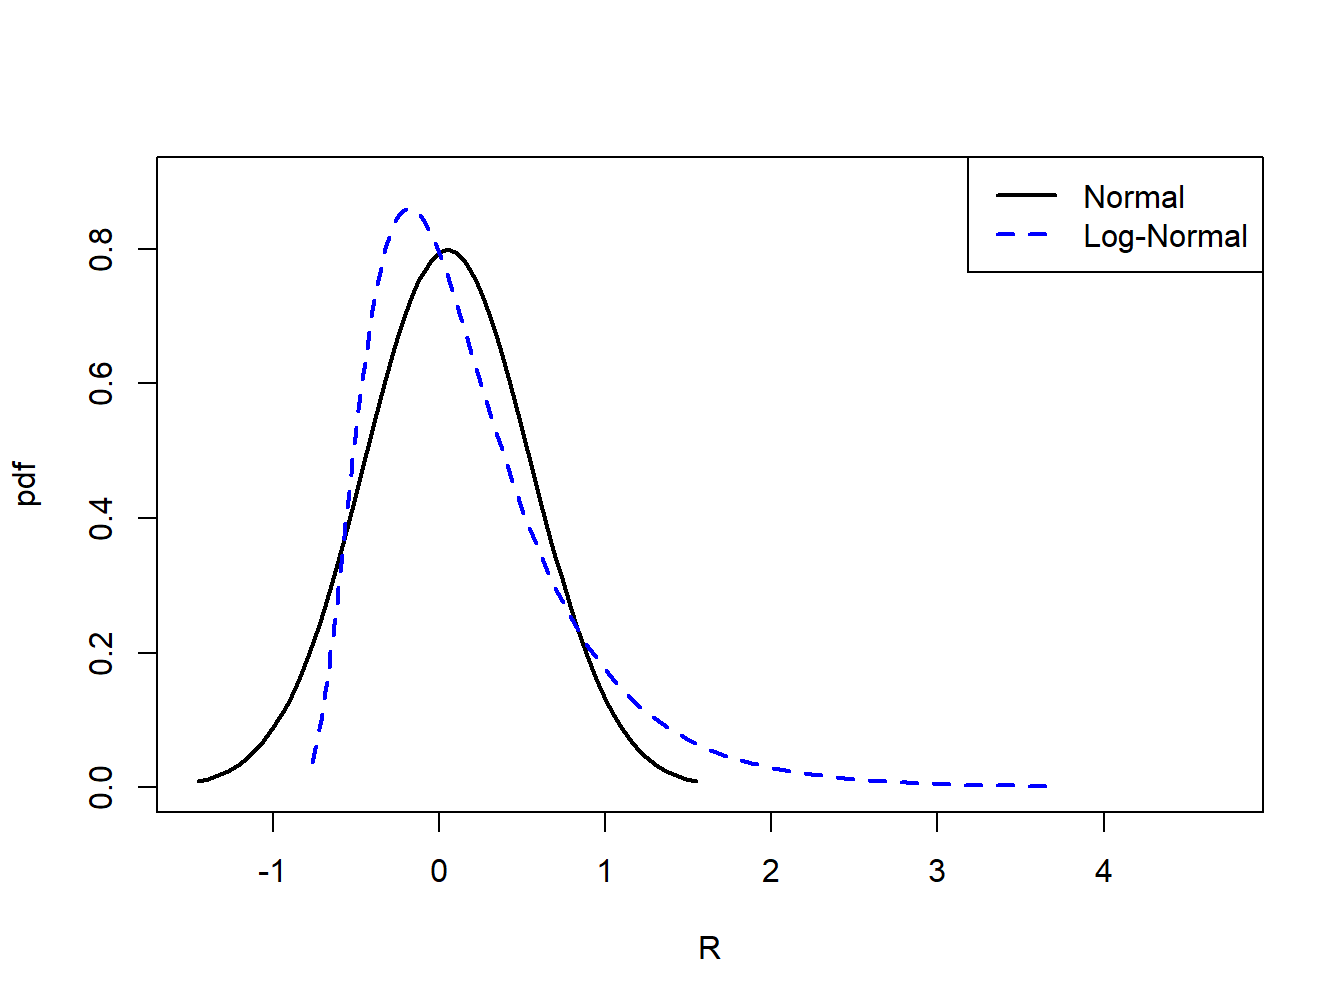 Normal distribution for $r_{t}$ and log-normal distribution for $R_{t}=e^{r_{t}}-1$.